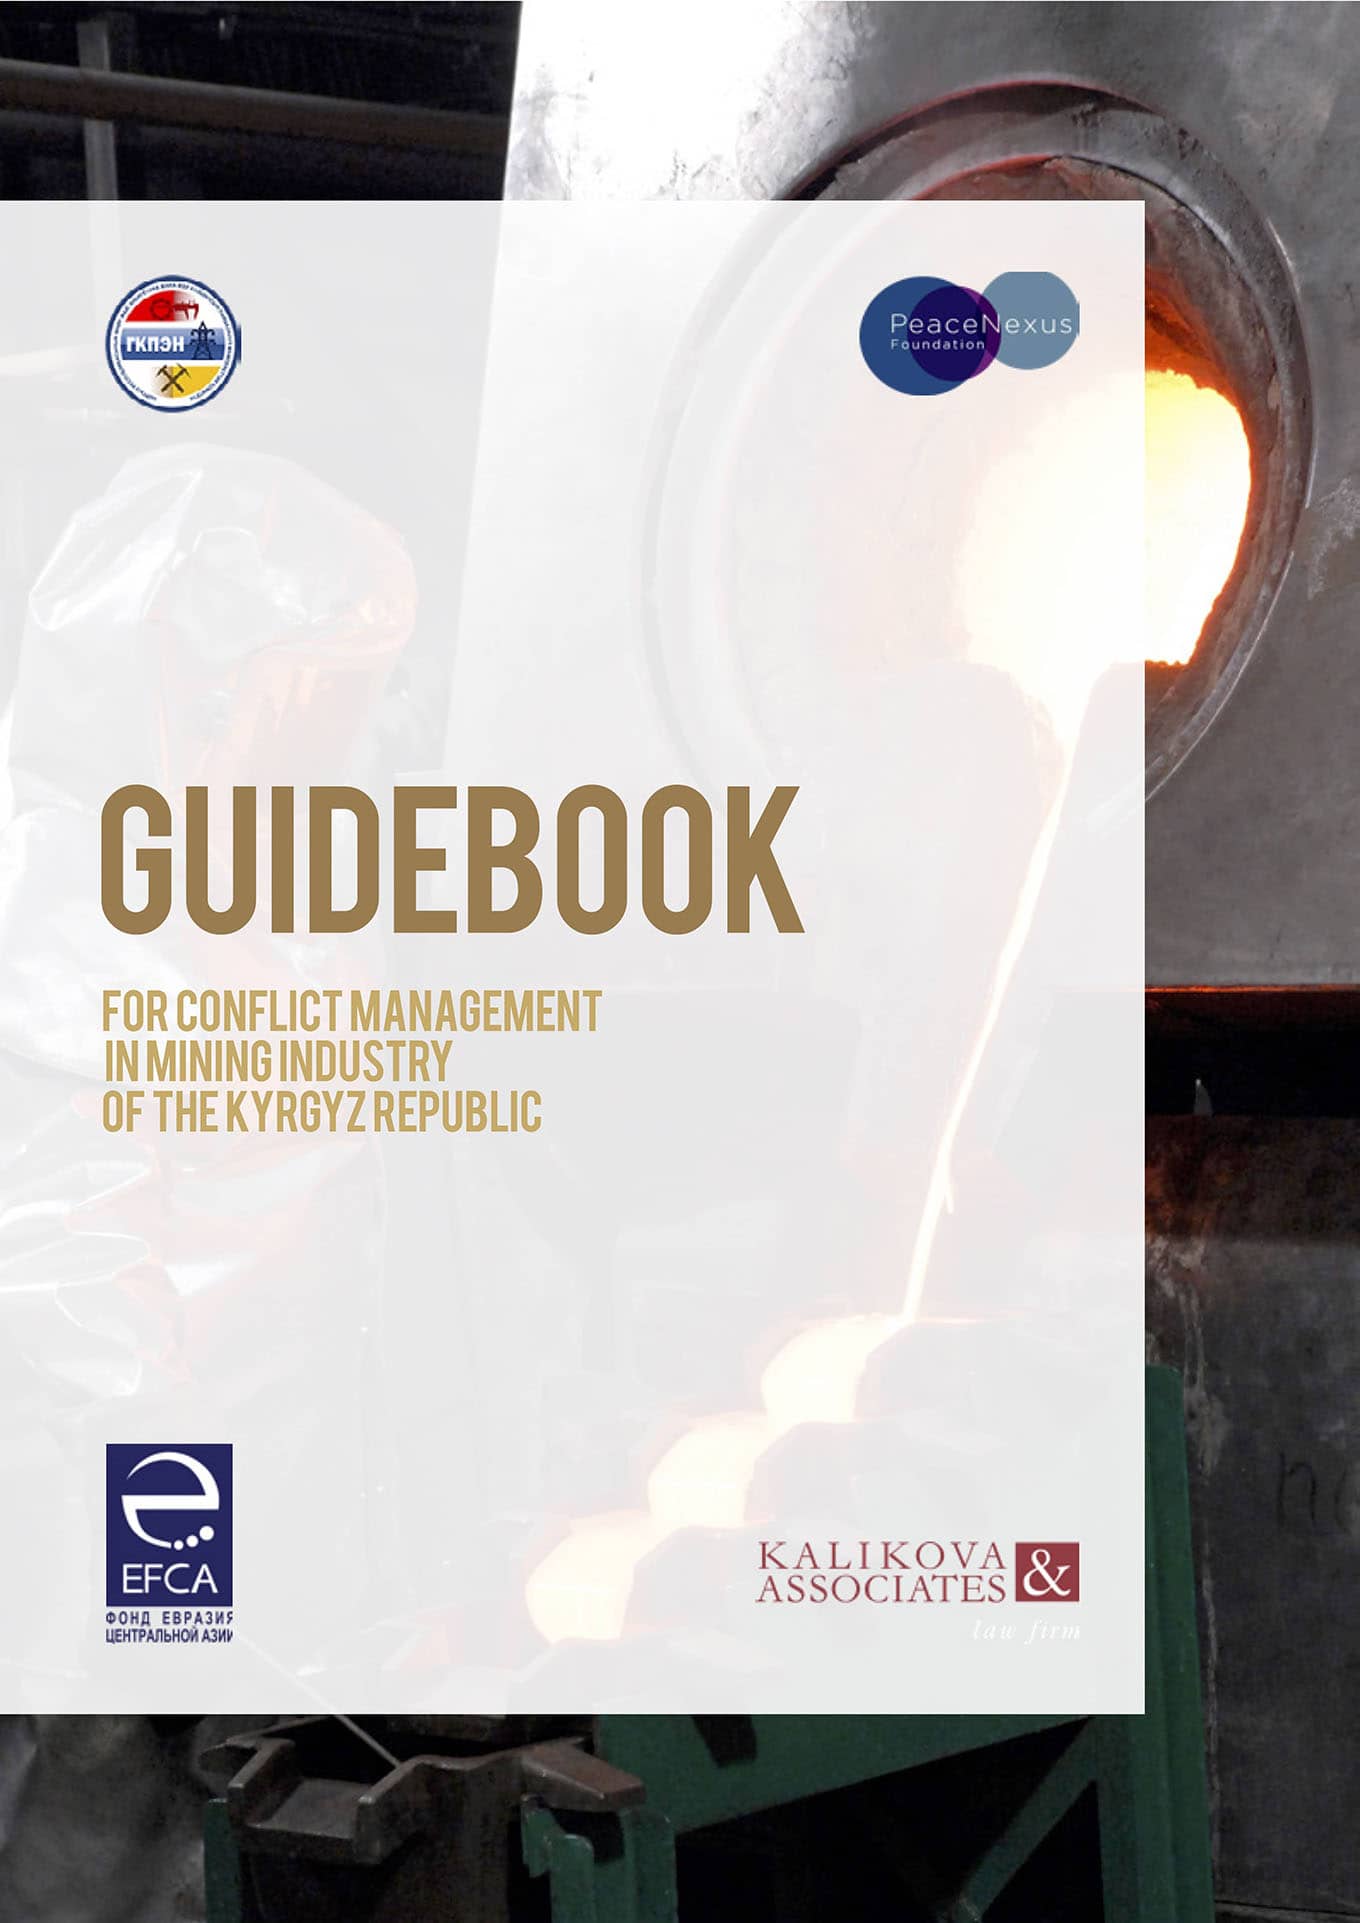 Guidebook for Conflict Management in Mining Industry of the Kyrgyz Republic (Eurasia Foundation of Central Asia and Kalikova & Associates, 2017)